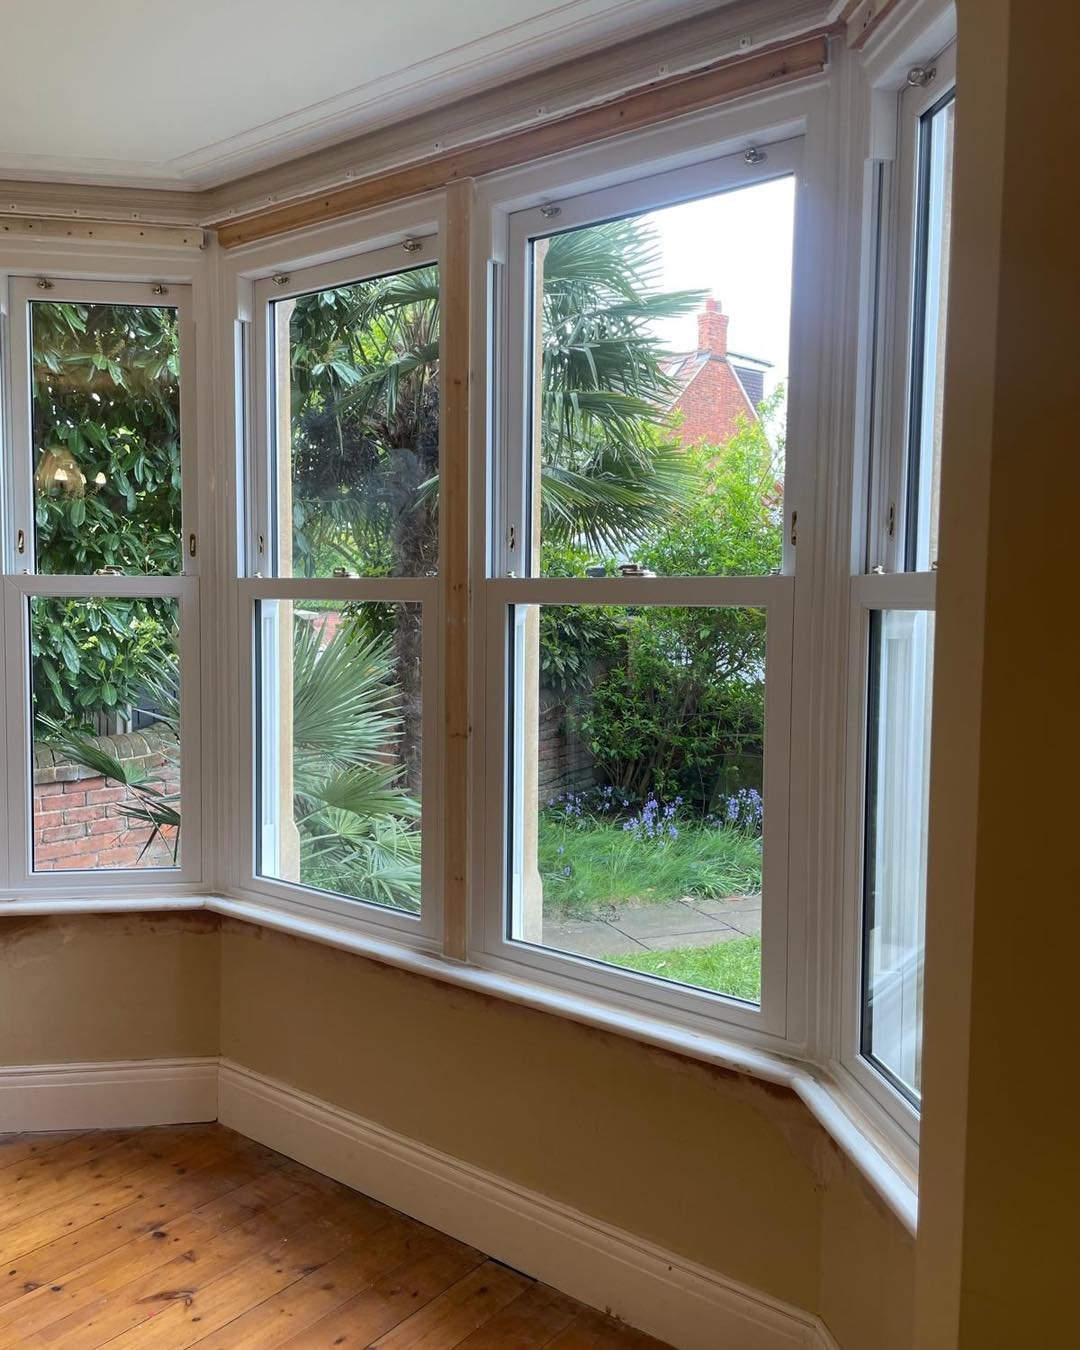 Beautiful Vertical Sliding Upvc sash windows installed this week, another very happy customer. Well done to all of the team here at Bedfordshire Windows. Feel free to give us a call for all of your home improvement needs.